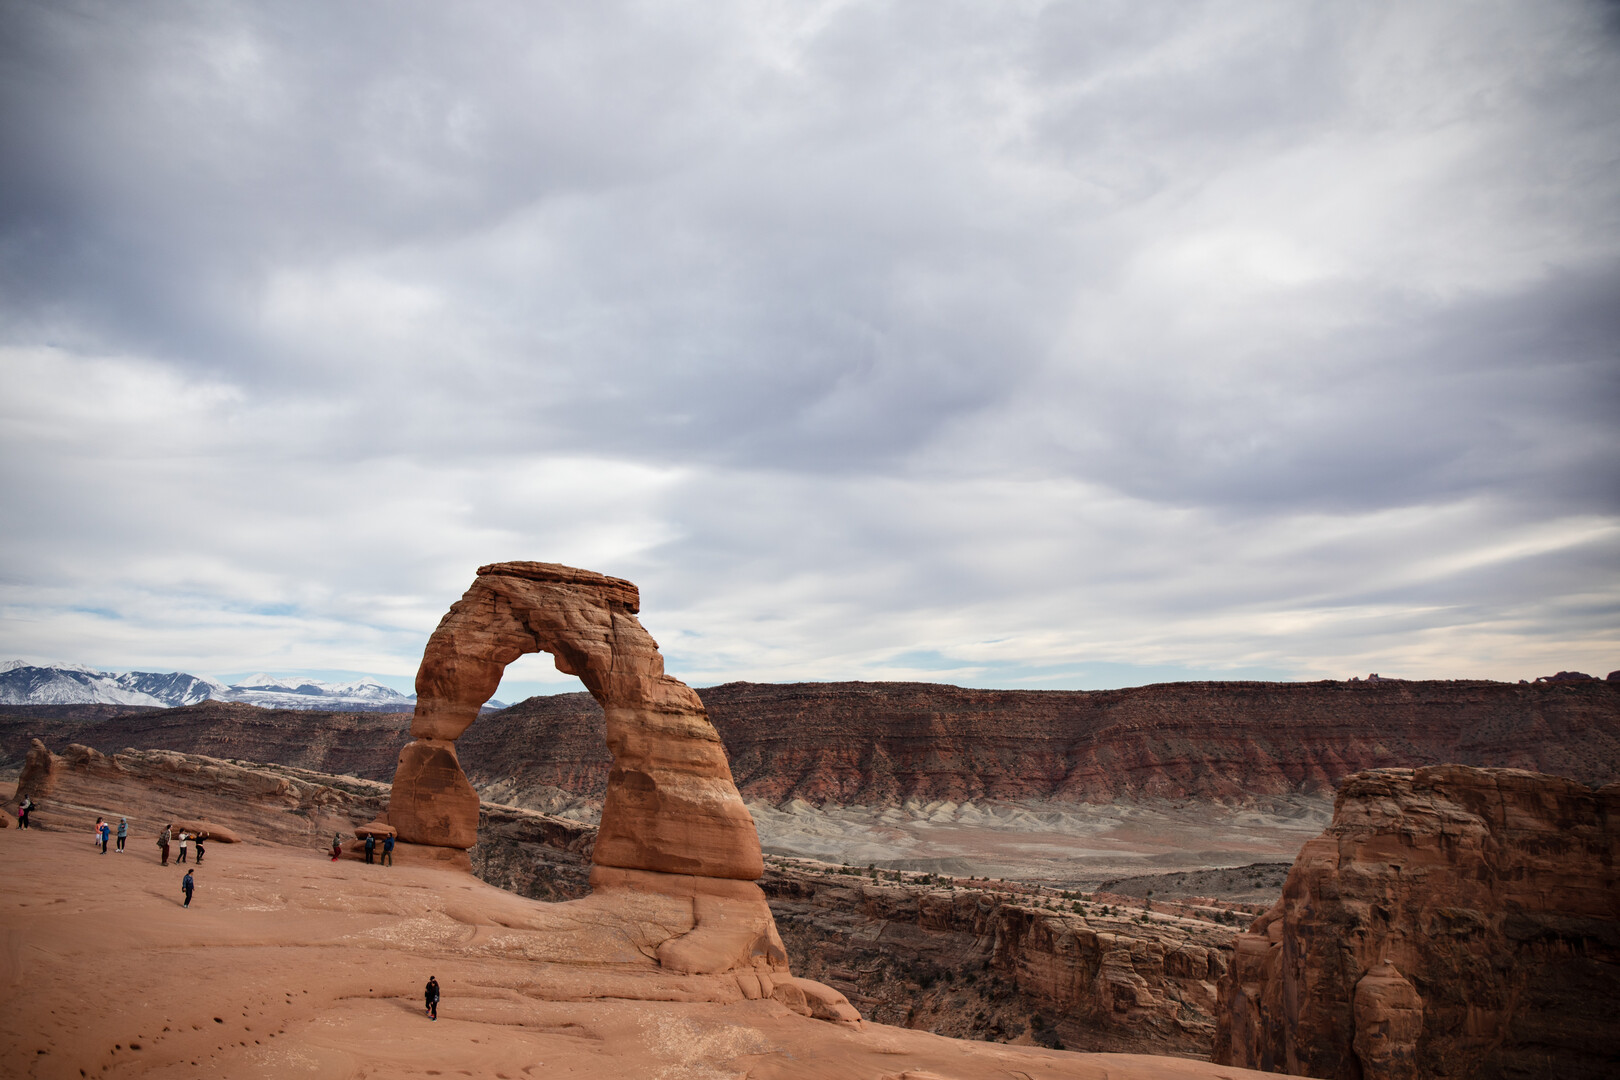 The most famous arch in Arches National Park in Utah, on April 1, 2023. Photo by Mila Naumovska '26.